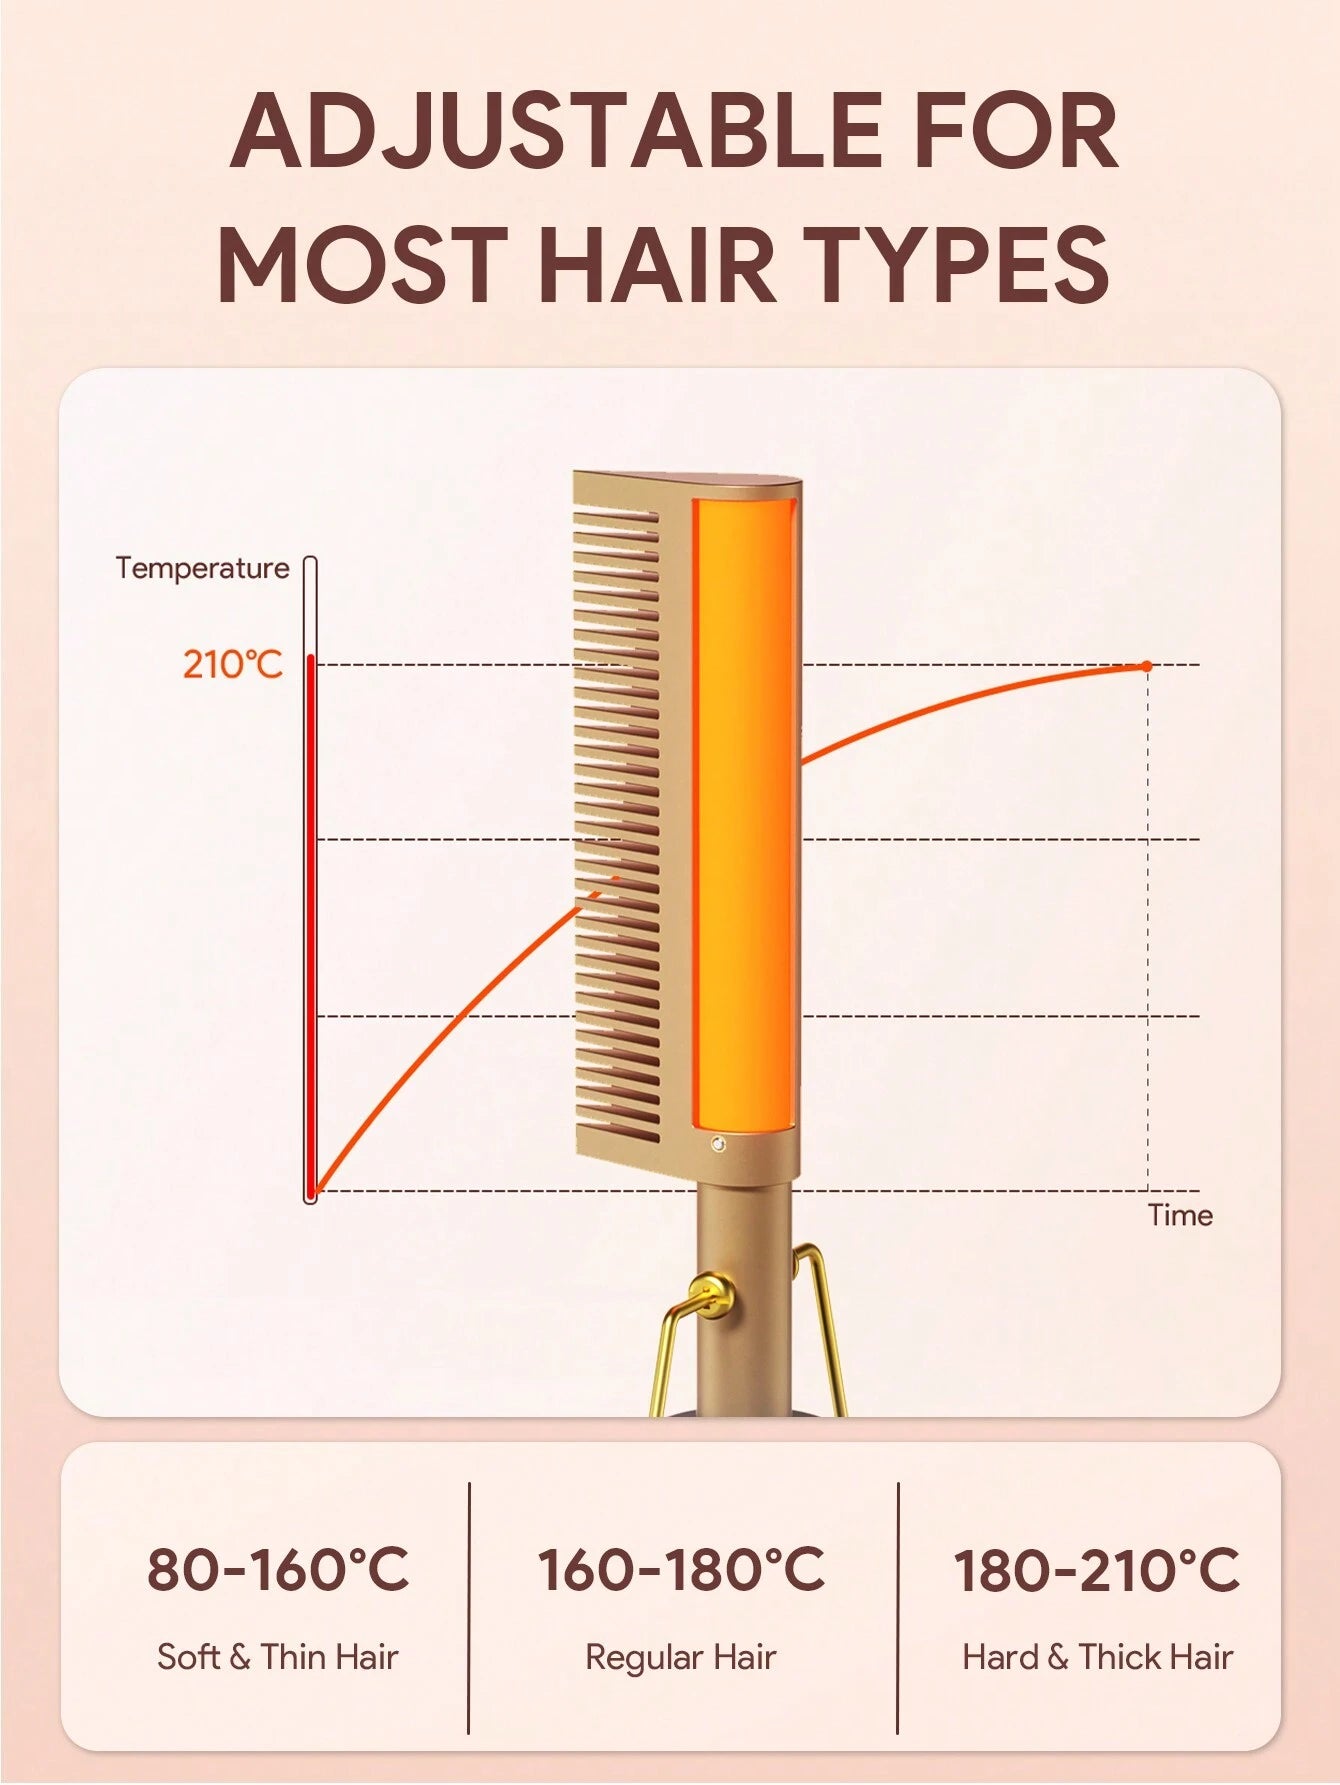 JMMO Electric Hot Comb - Pressing Comb for Natural Black Hair, Straightener for Wigs, Wigs & Beard. Features 3 Adjustable Temperatures and 60-Minute Auto Power Off.